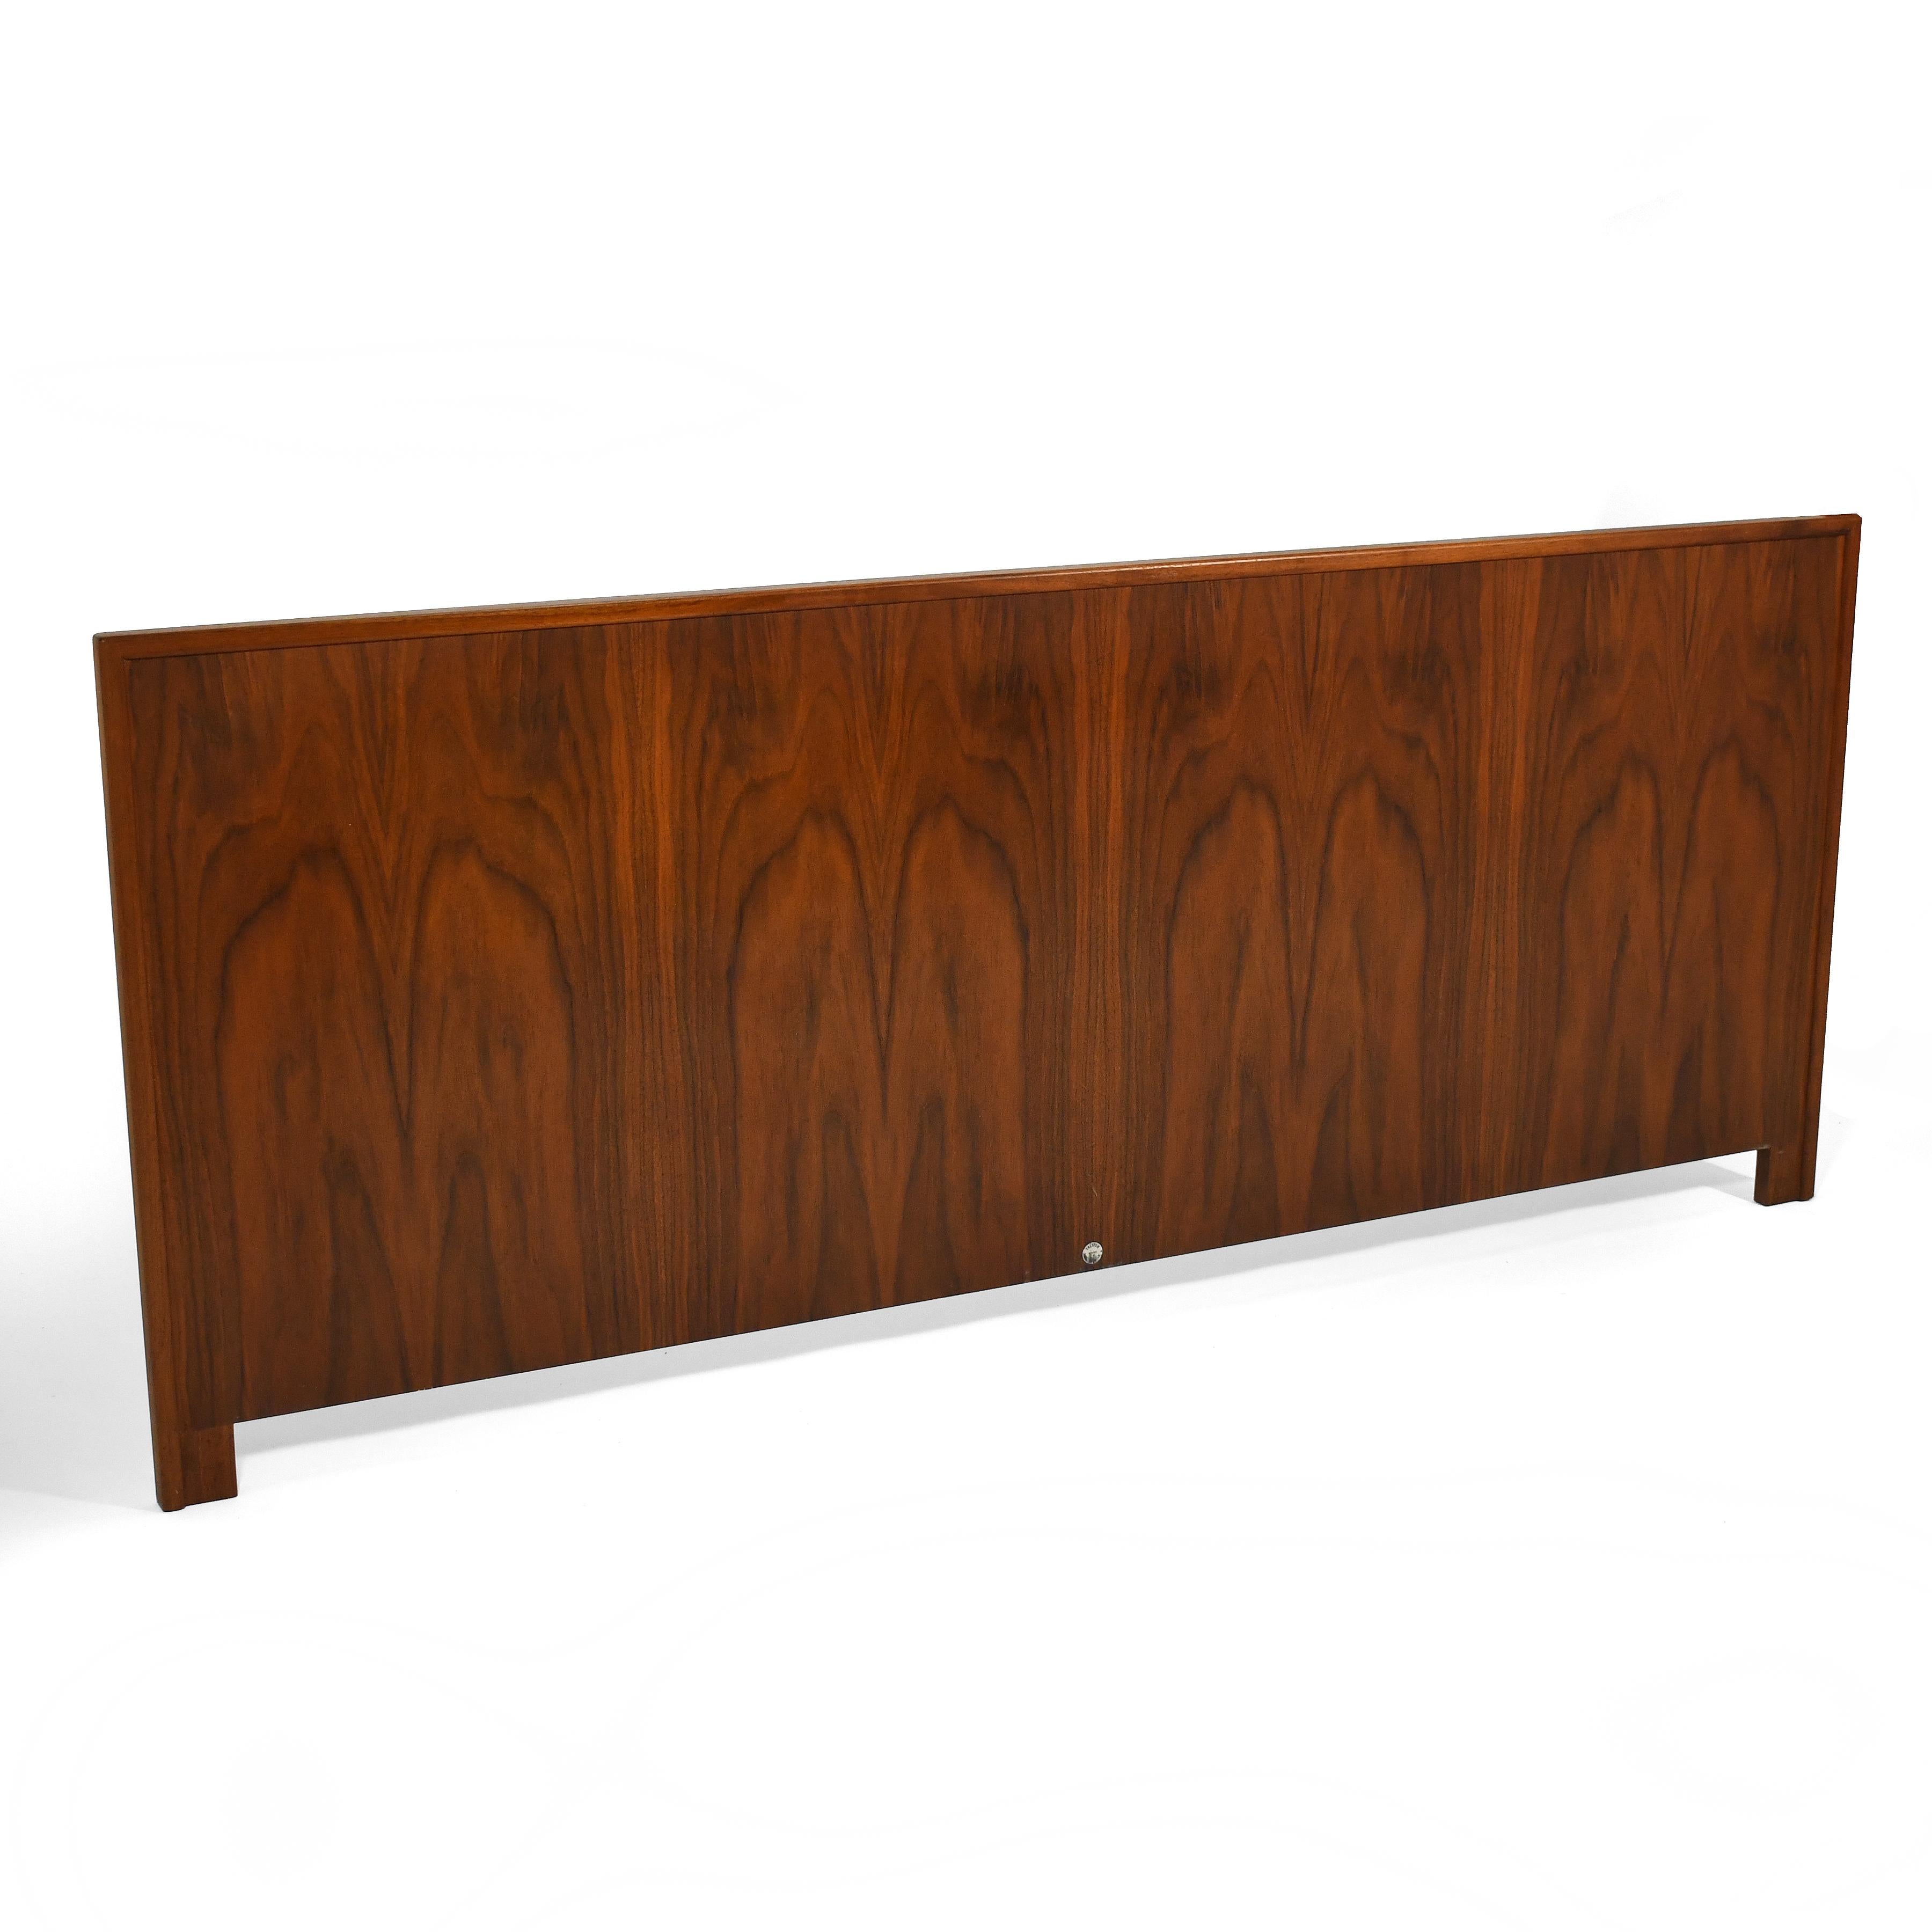 This big king-size Danish modern headboard by Falster Møbelfabrik combines subtle design, excellent craftsmanship, and beautifully figured wood.

Measures: 34